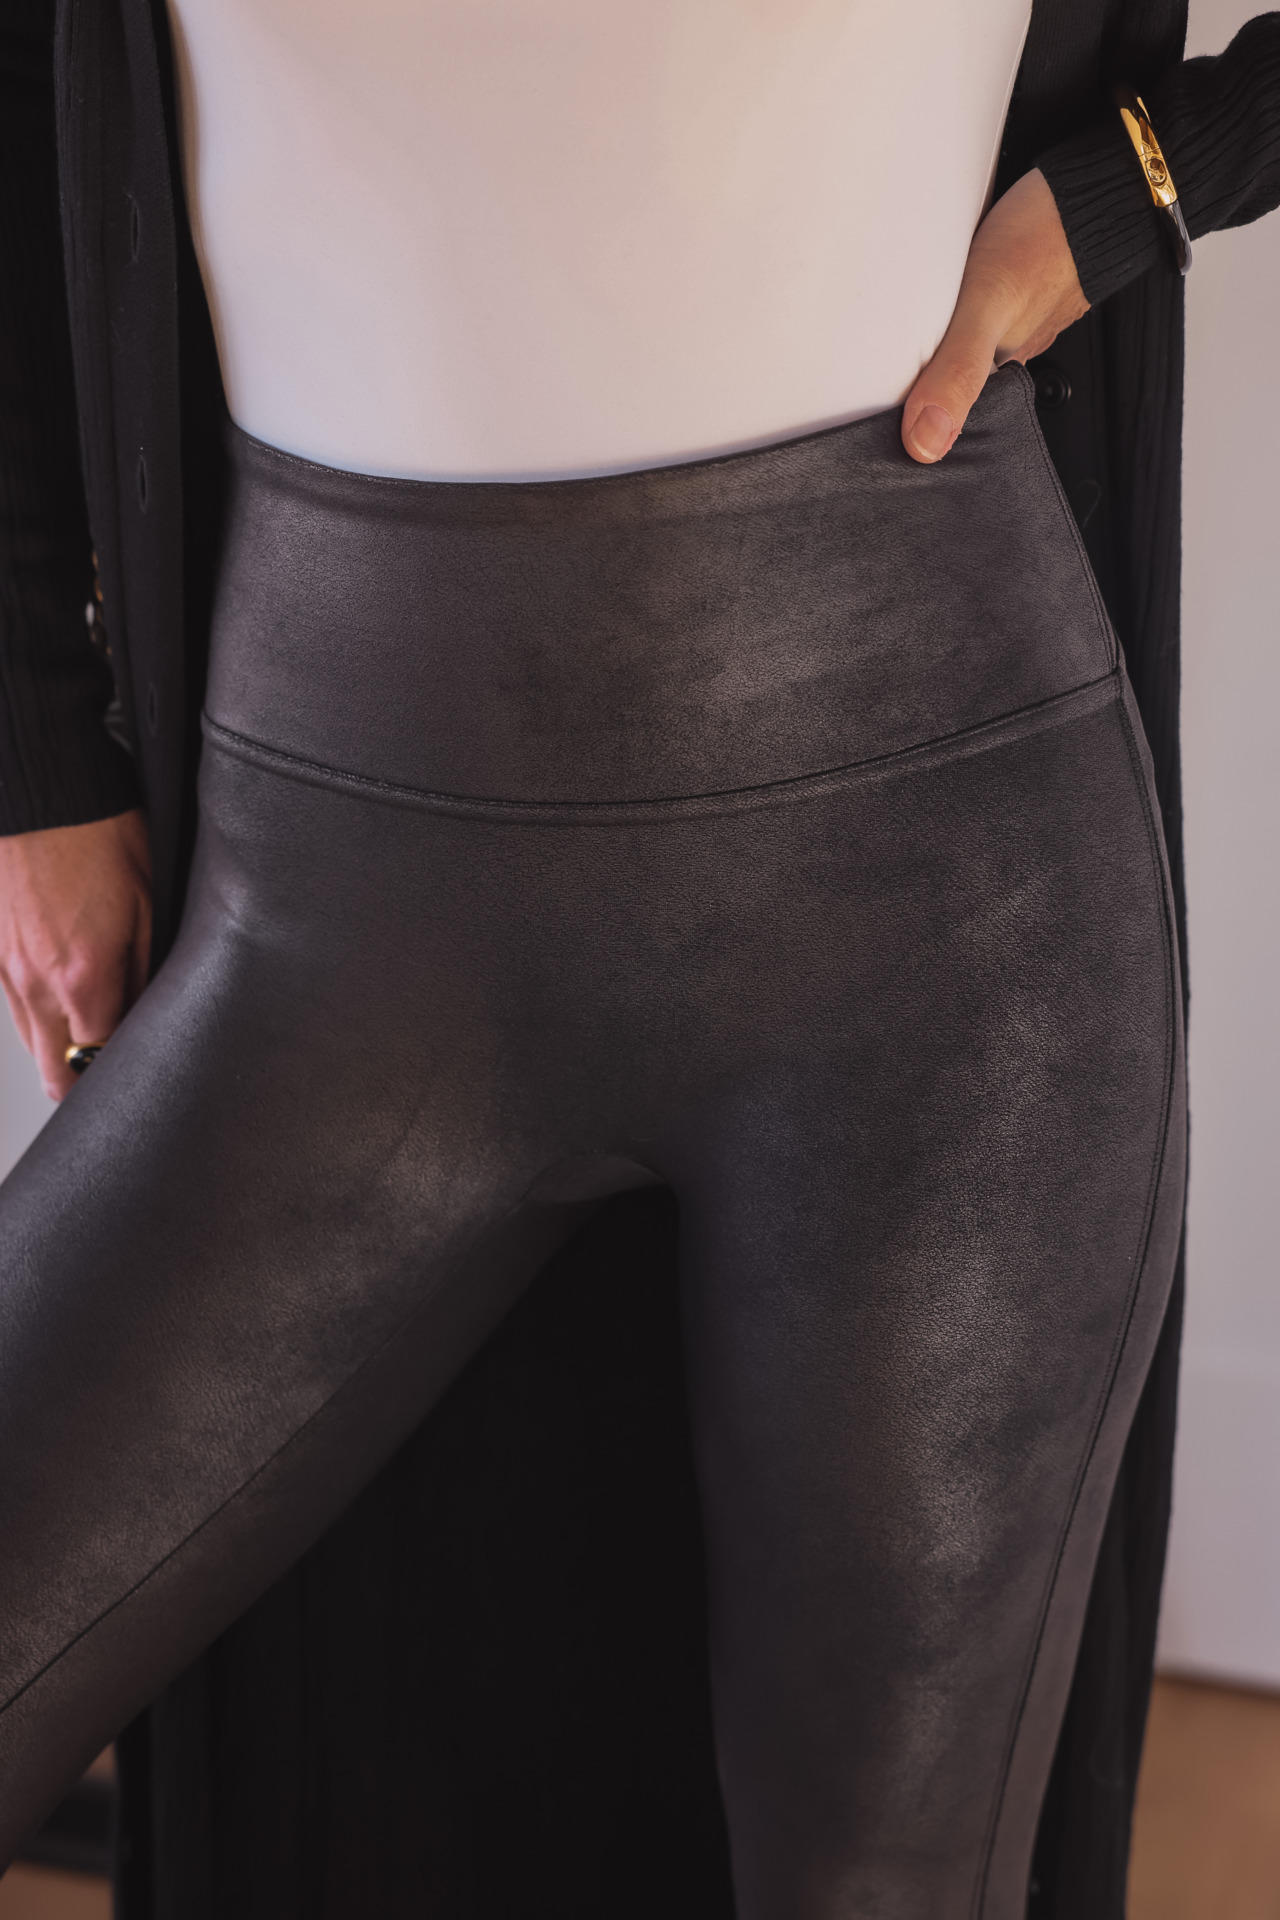 leather leggings over 40